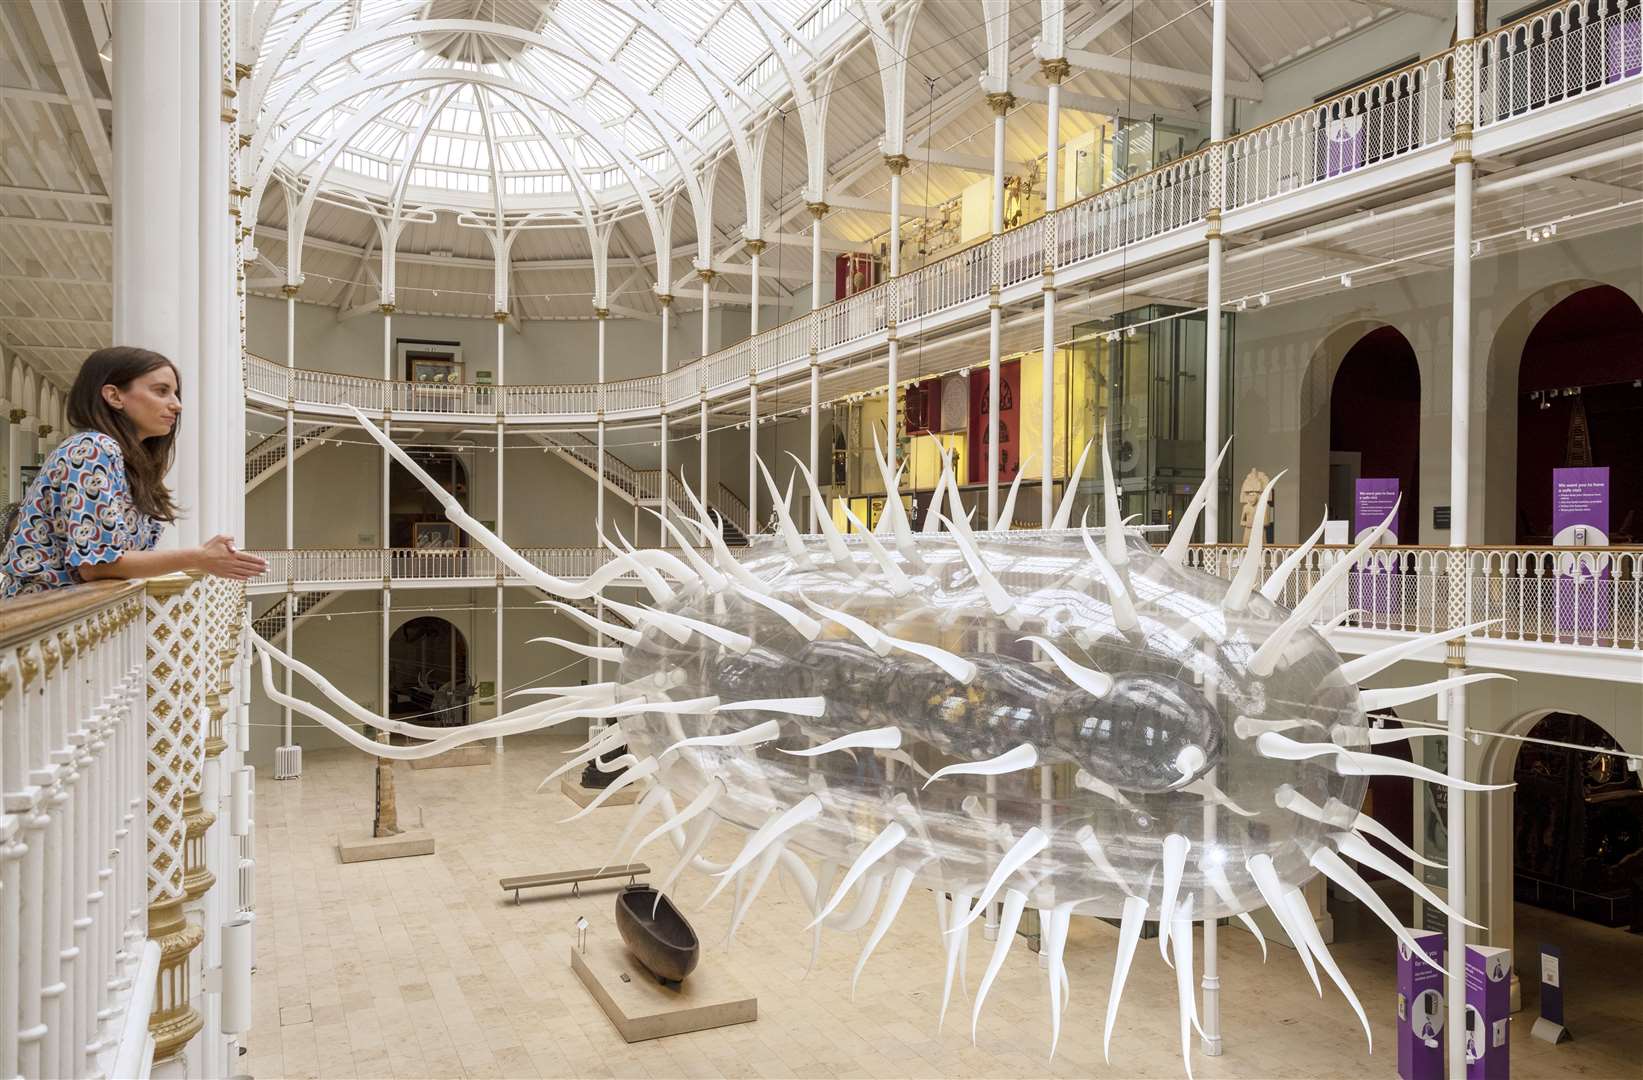 The impressive sculpture is being displayed in the museum’s grand palace (Luke Jerram/PA)